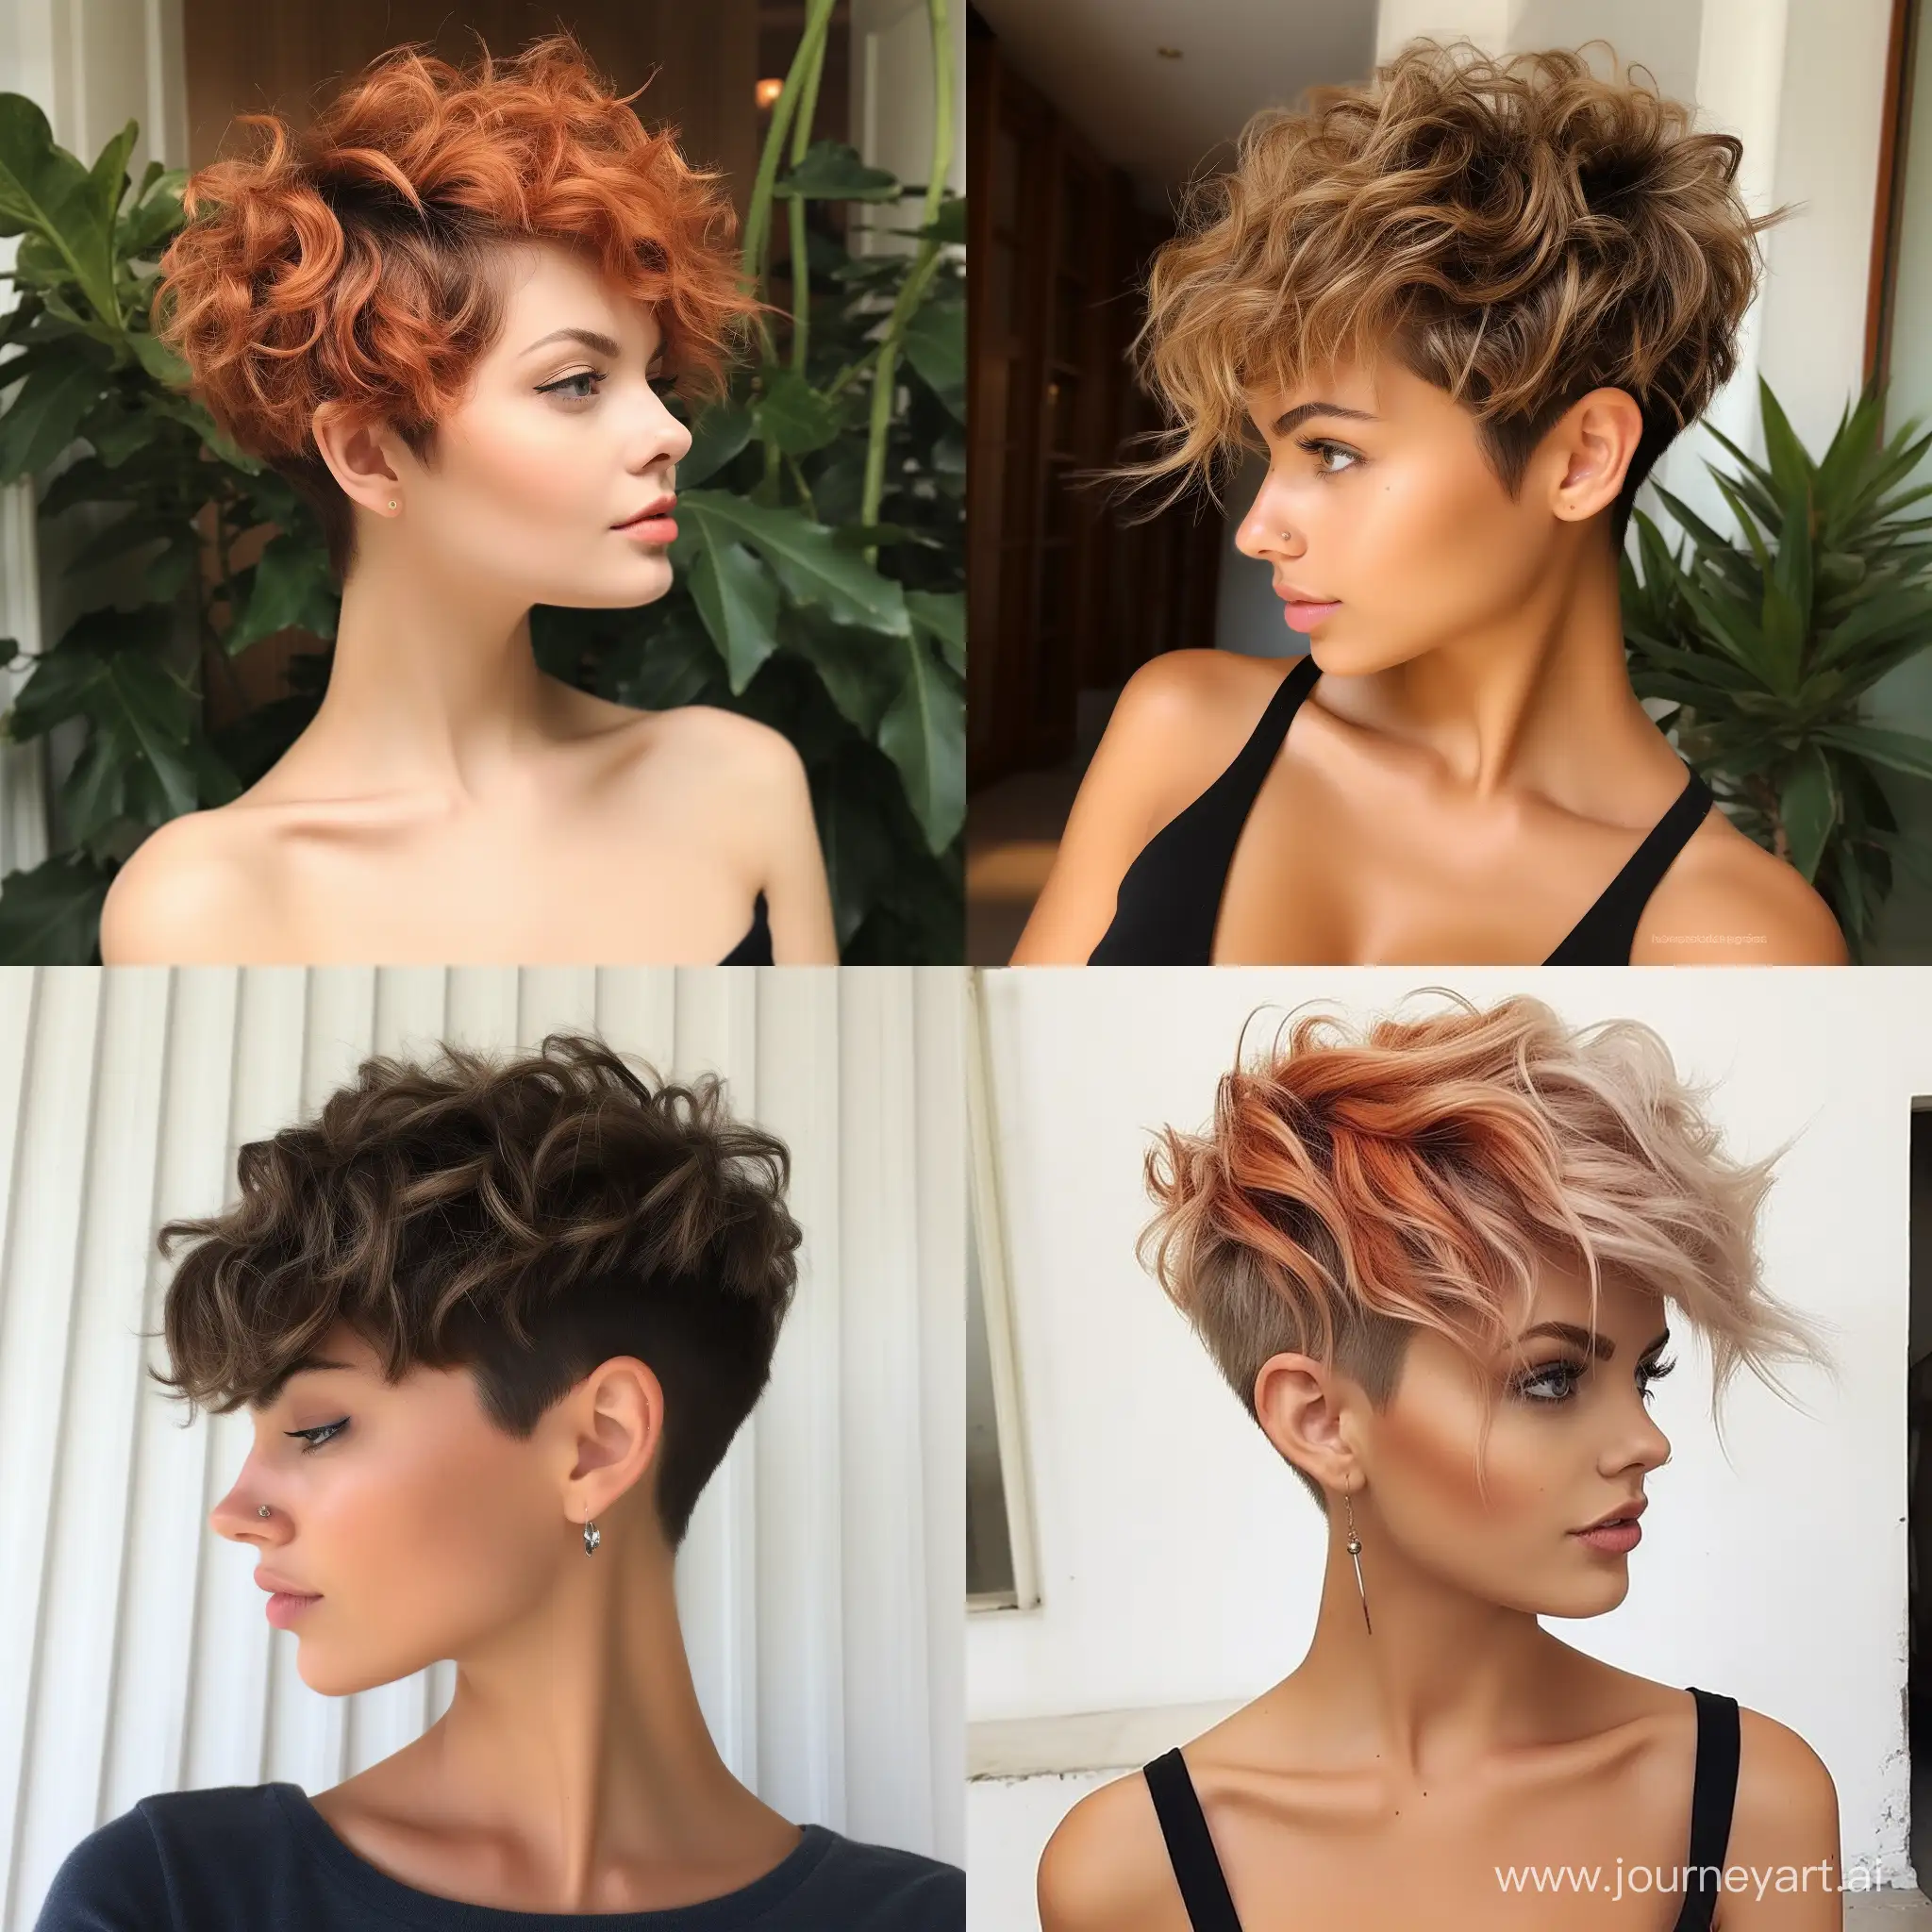 Chic-Short-and-Curly-Hairstyles-for-Women